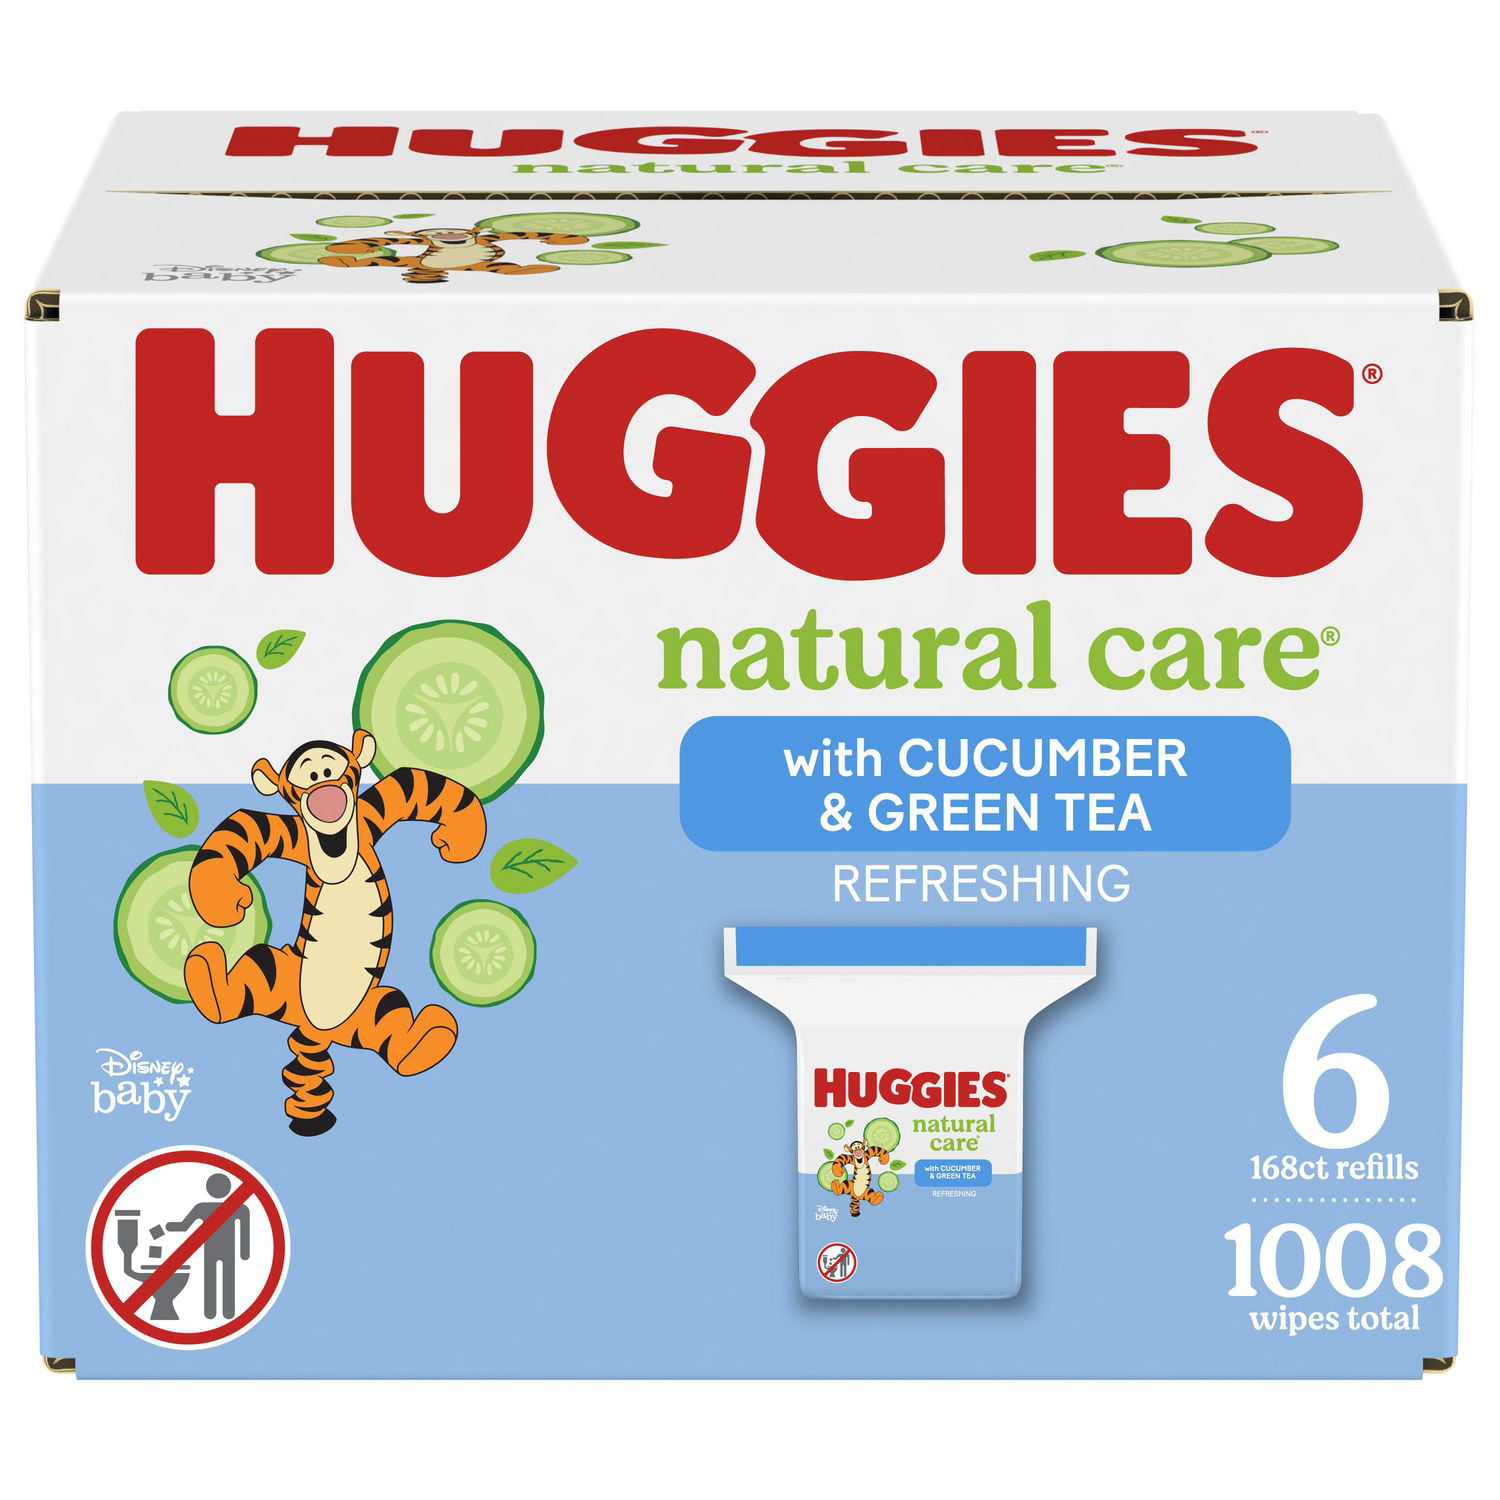 Huggies Natural Care Refreshing Baby Wipes, SCENTED, 6 Refill Packs, 1,008  Wipes, 1008 Wipes 